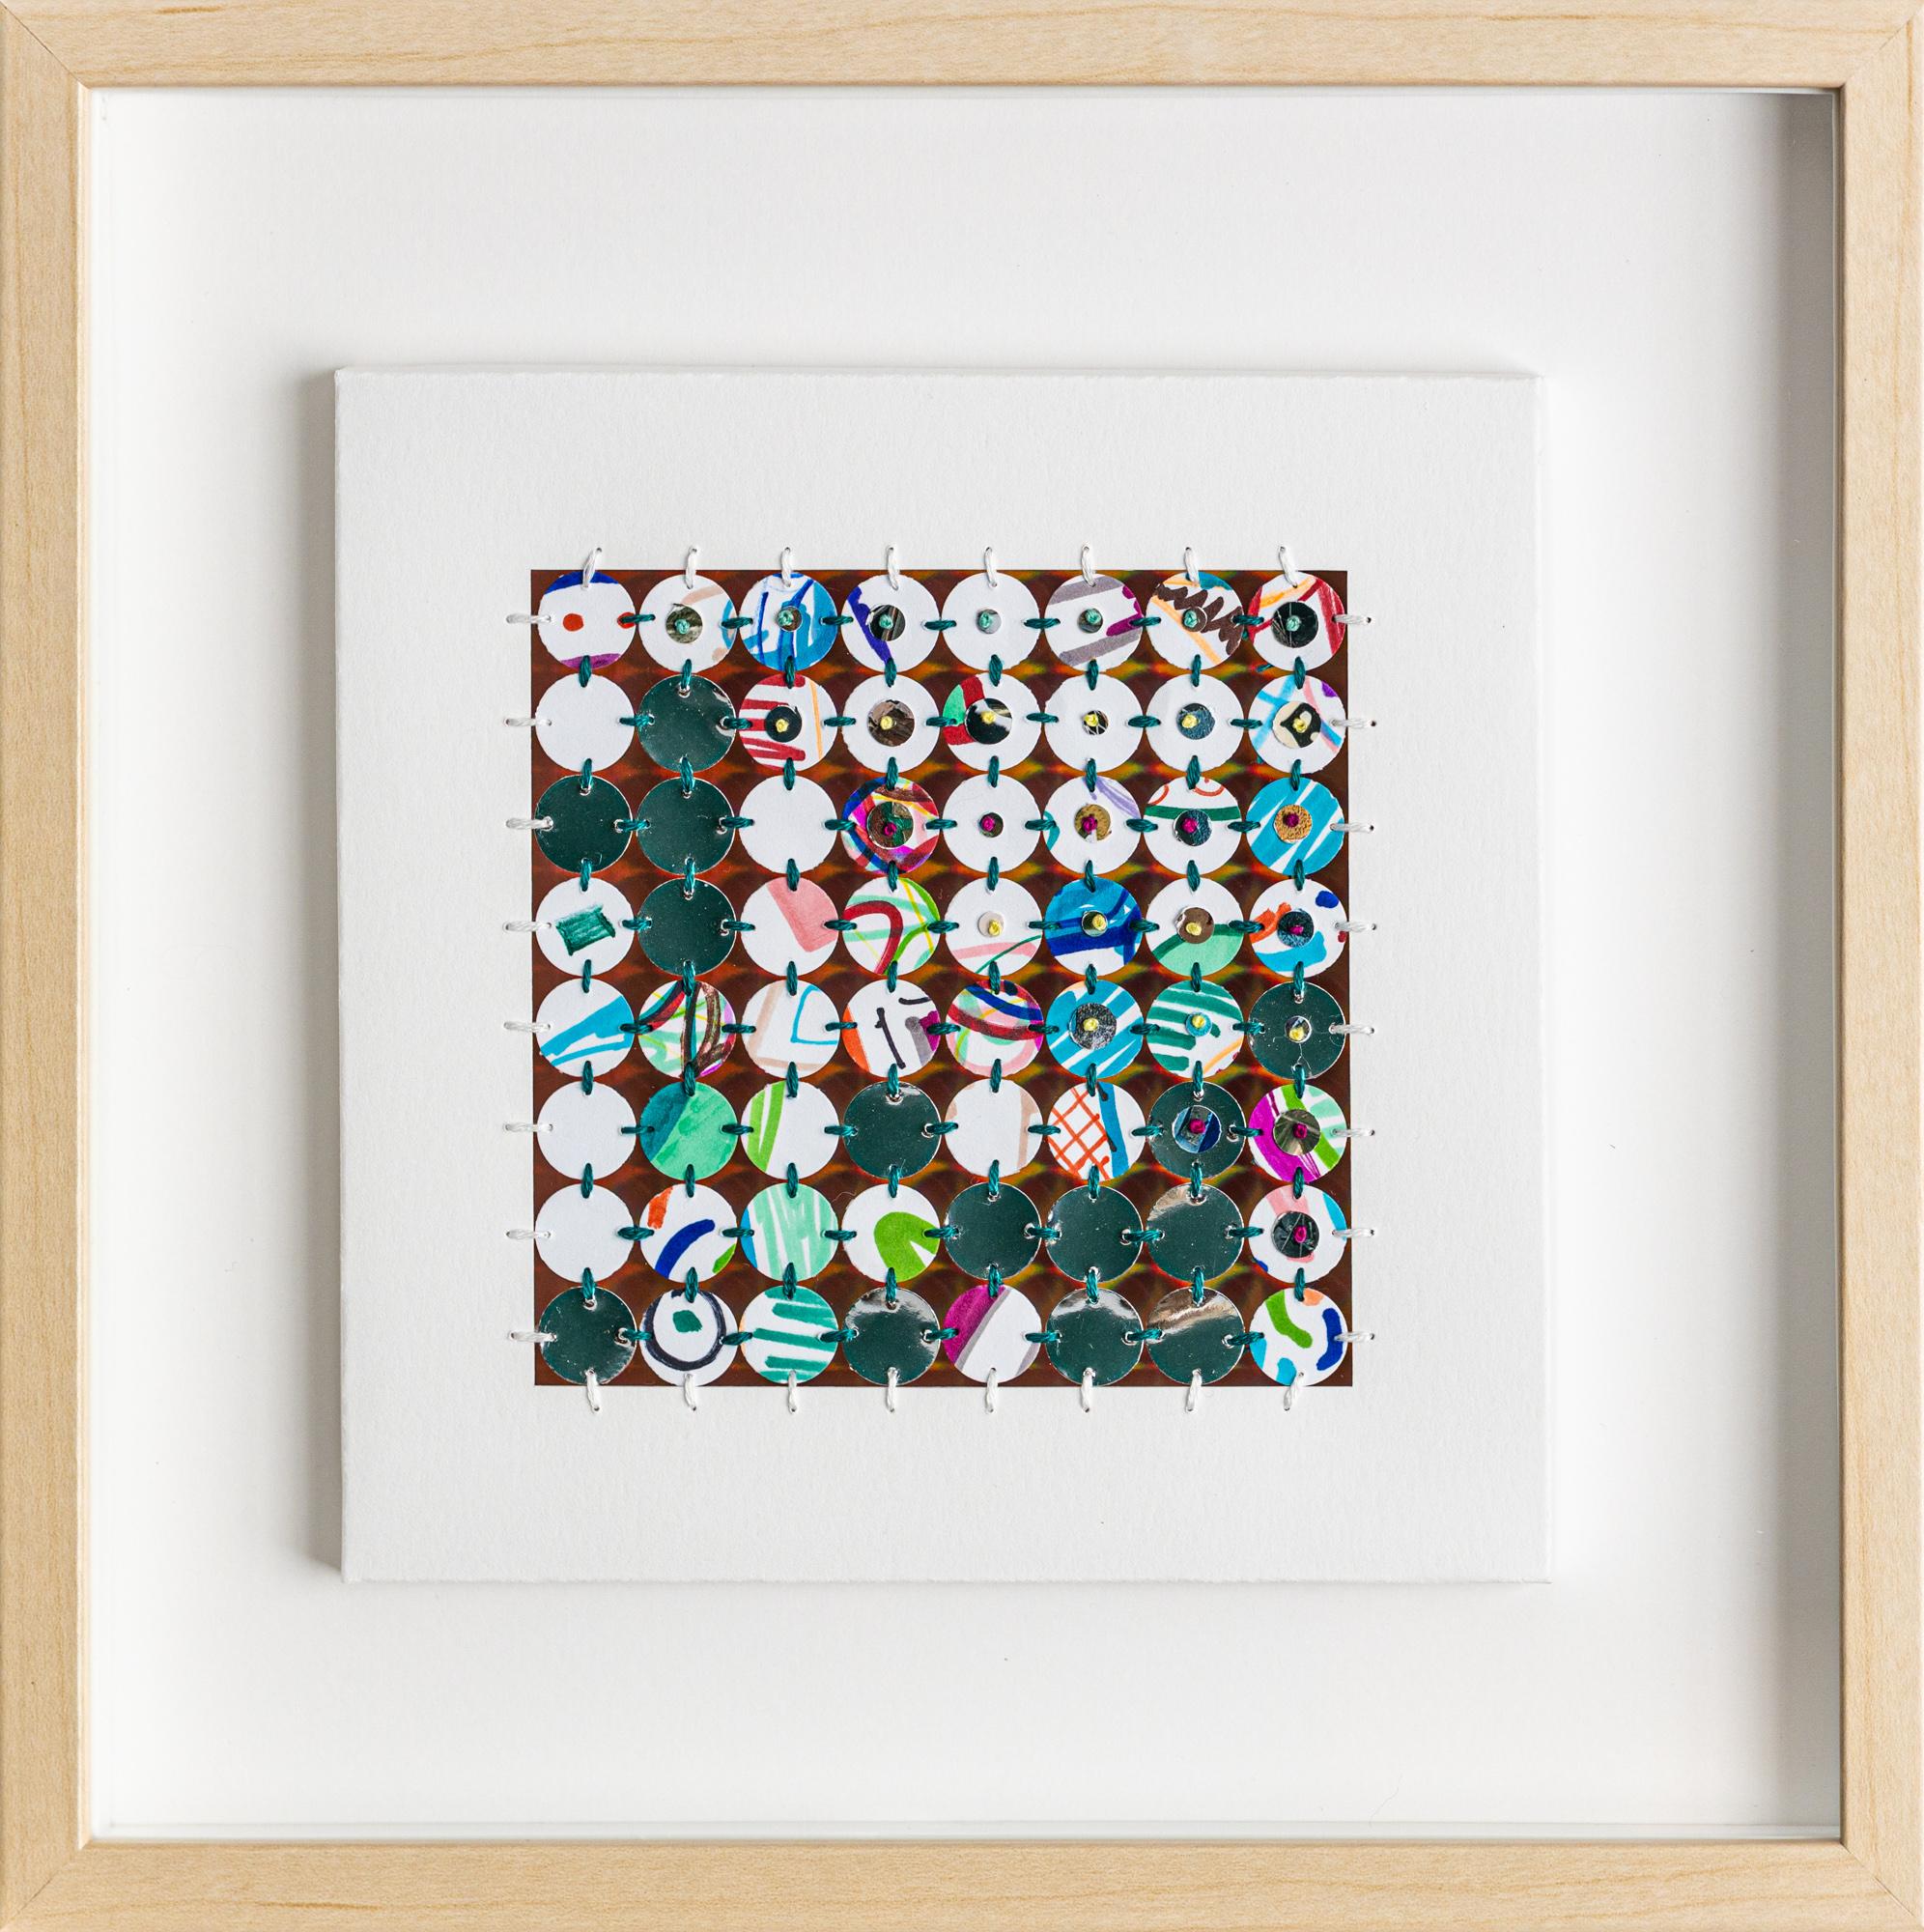 "Centering Square (Rainbow)" Floating collage, found object, embroidery, color - Mixed Media Art by Kelly Kozma